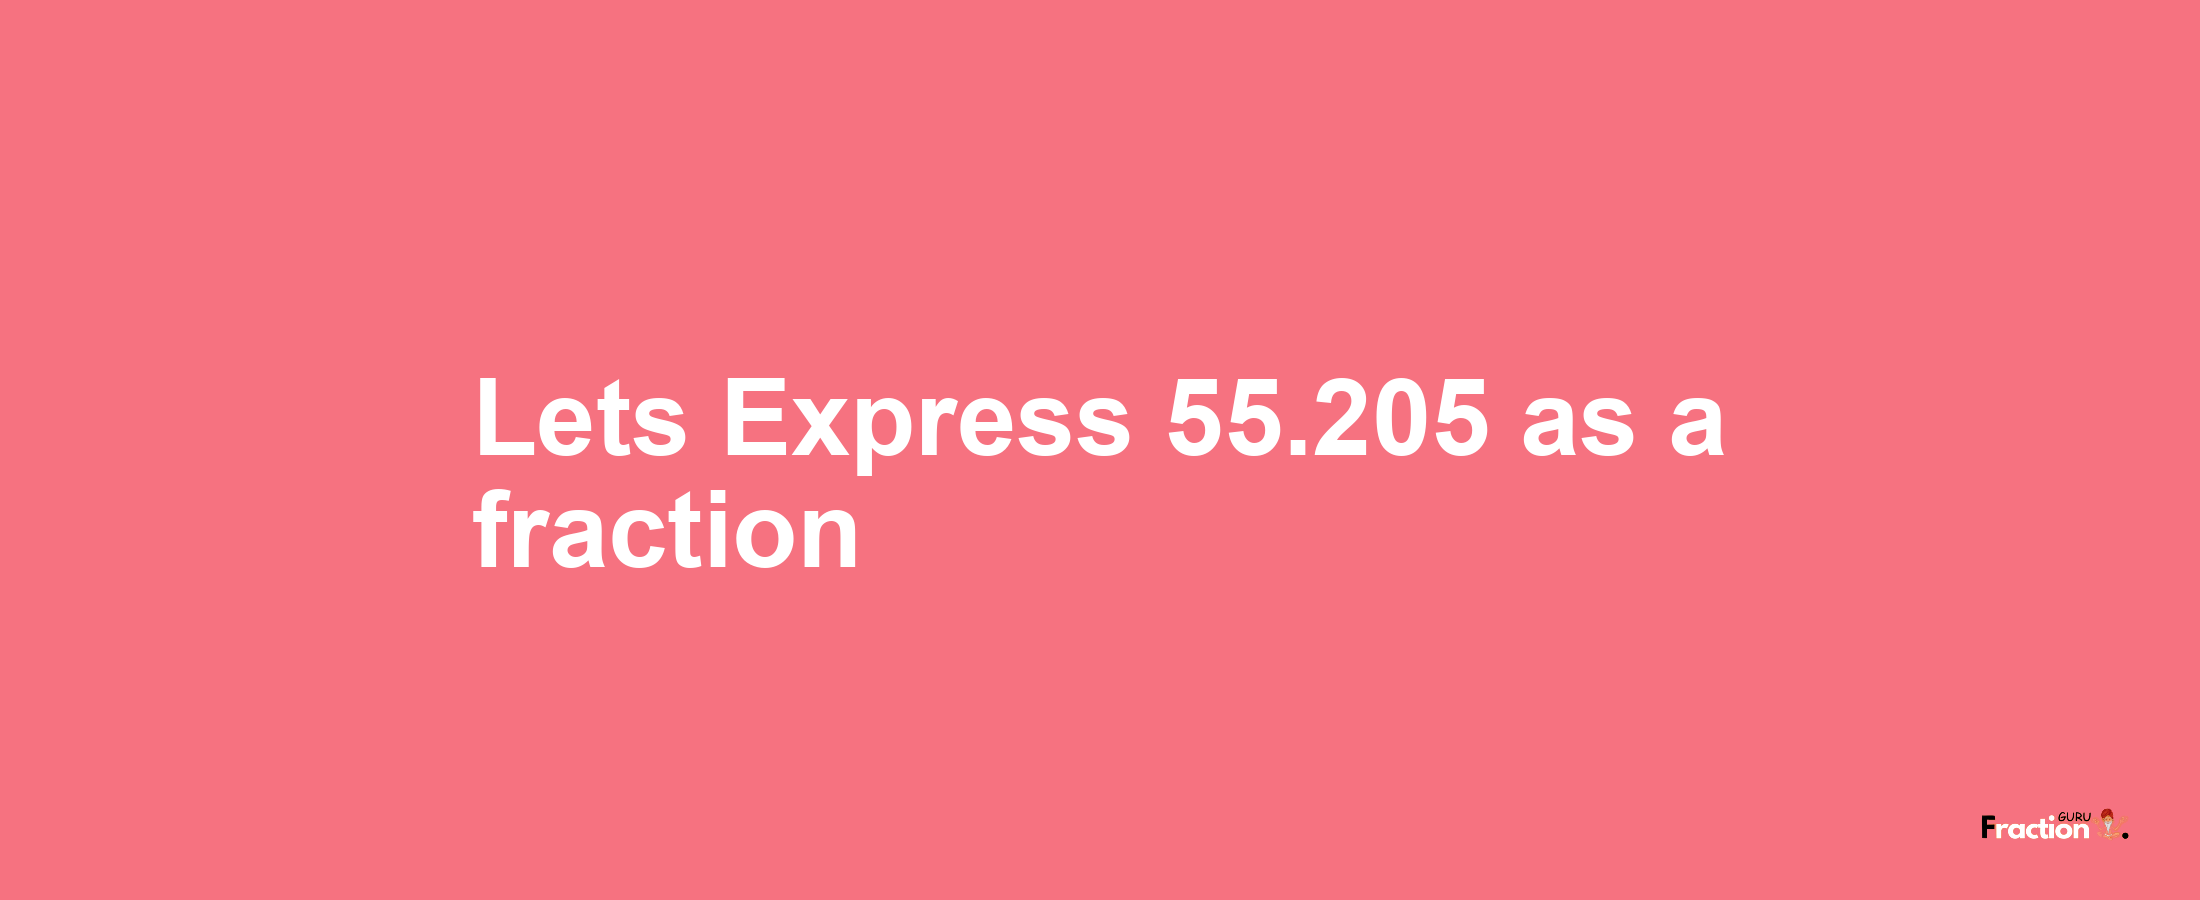 Lets Express 55.205 as afraction